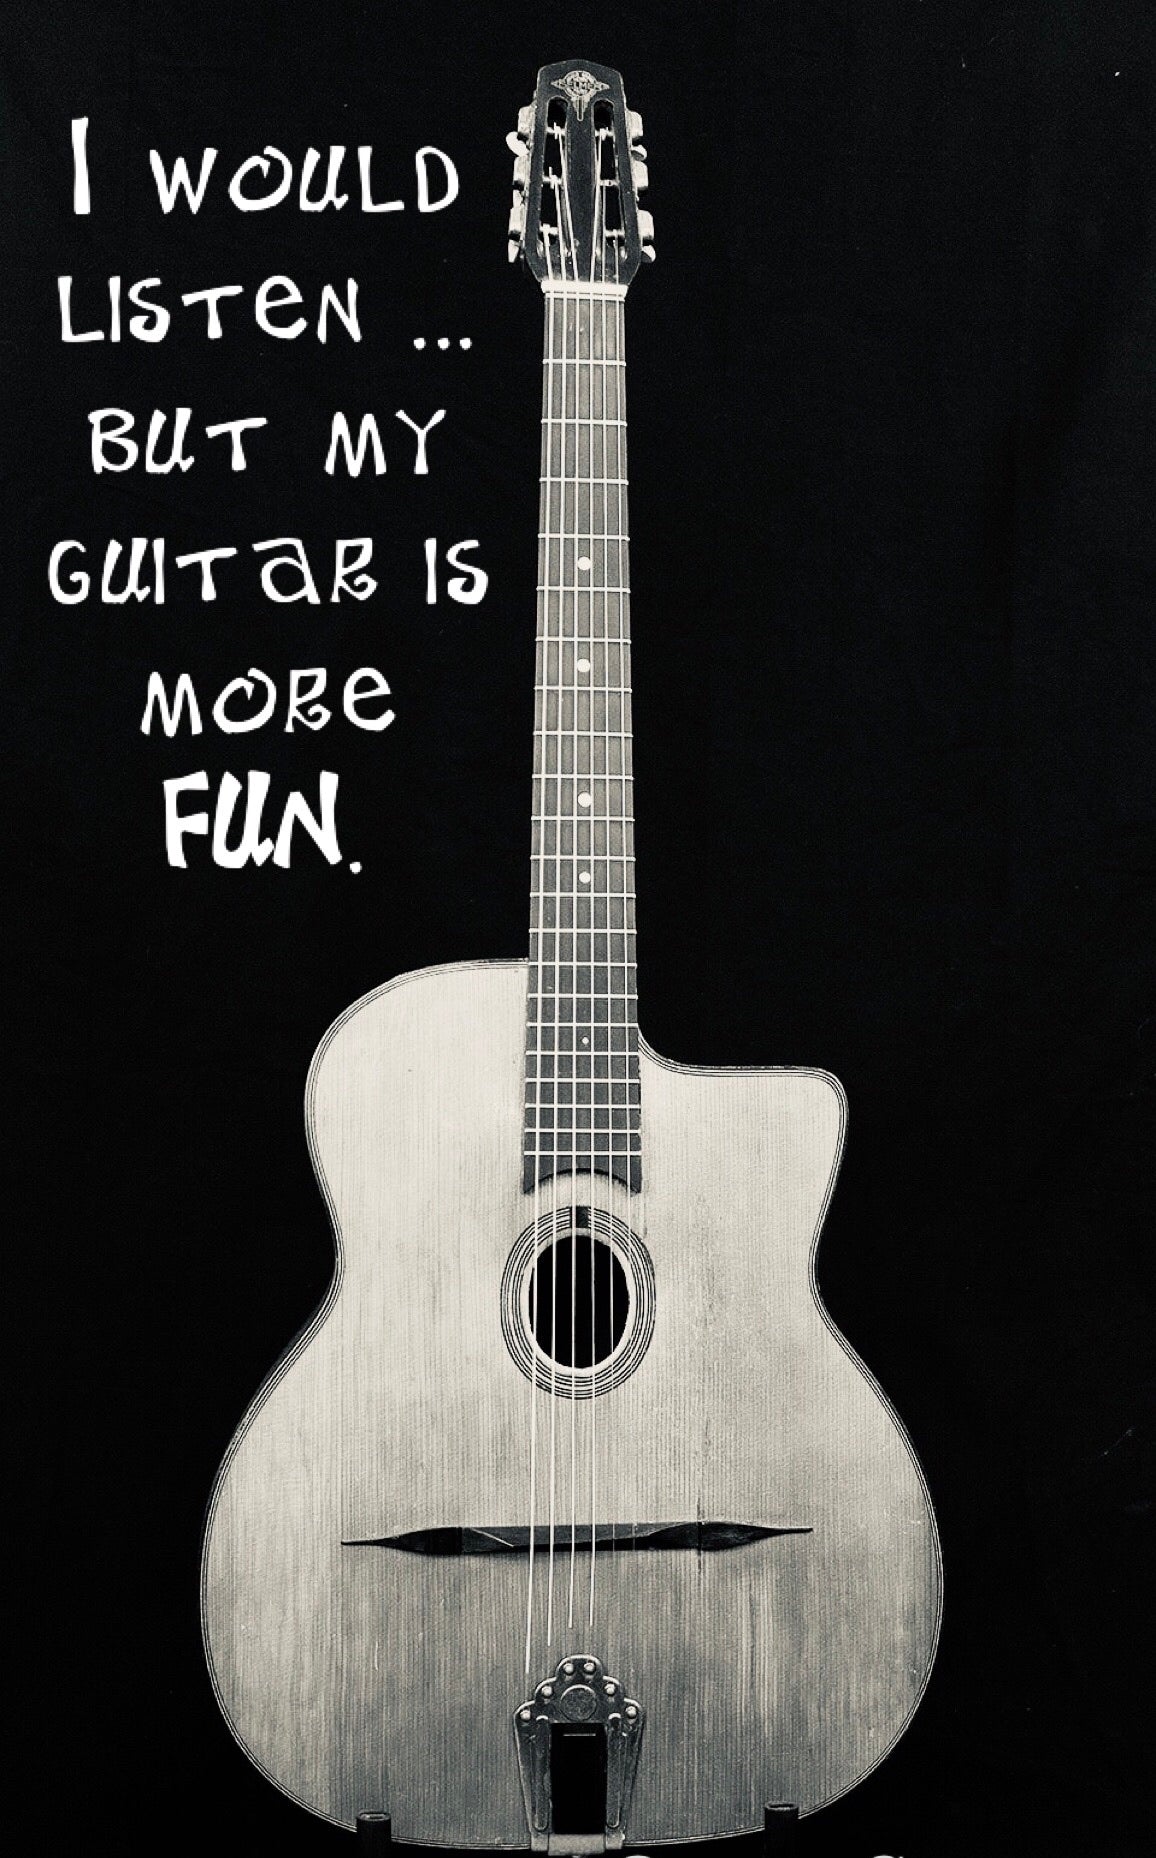 My Guitar is More Fun T-Shirt (This item has free delivery with orders over $55)